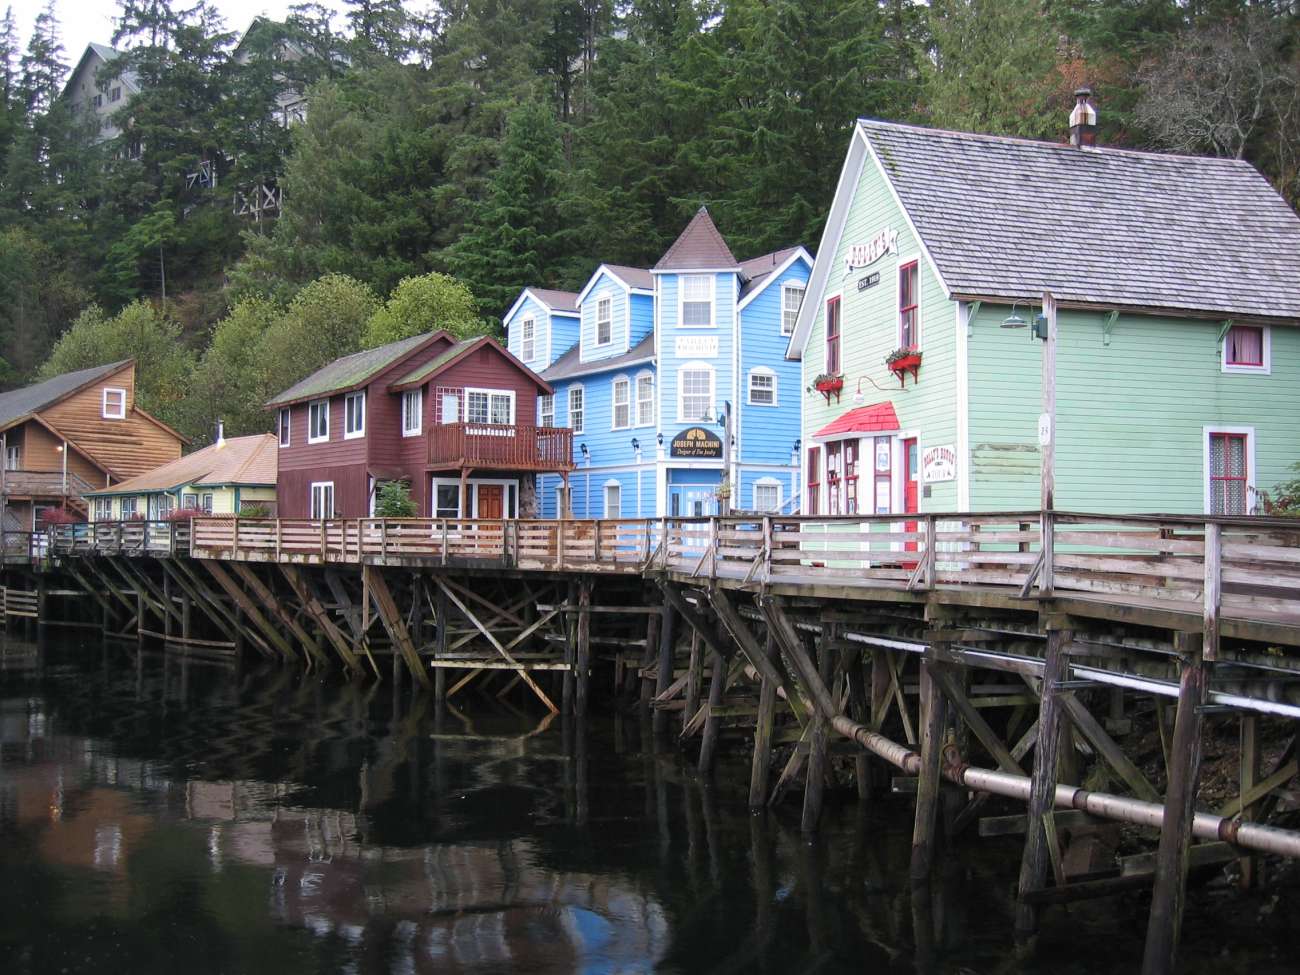 Restored houses and business establishments along the Ketchikan waterfront